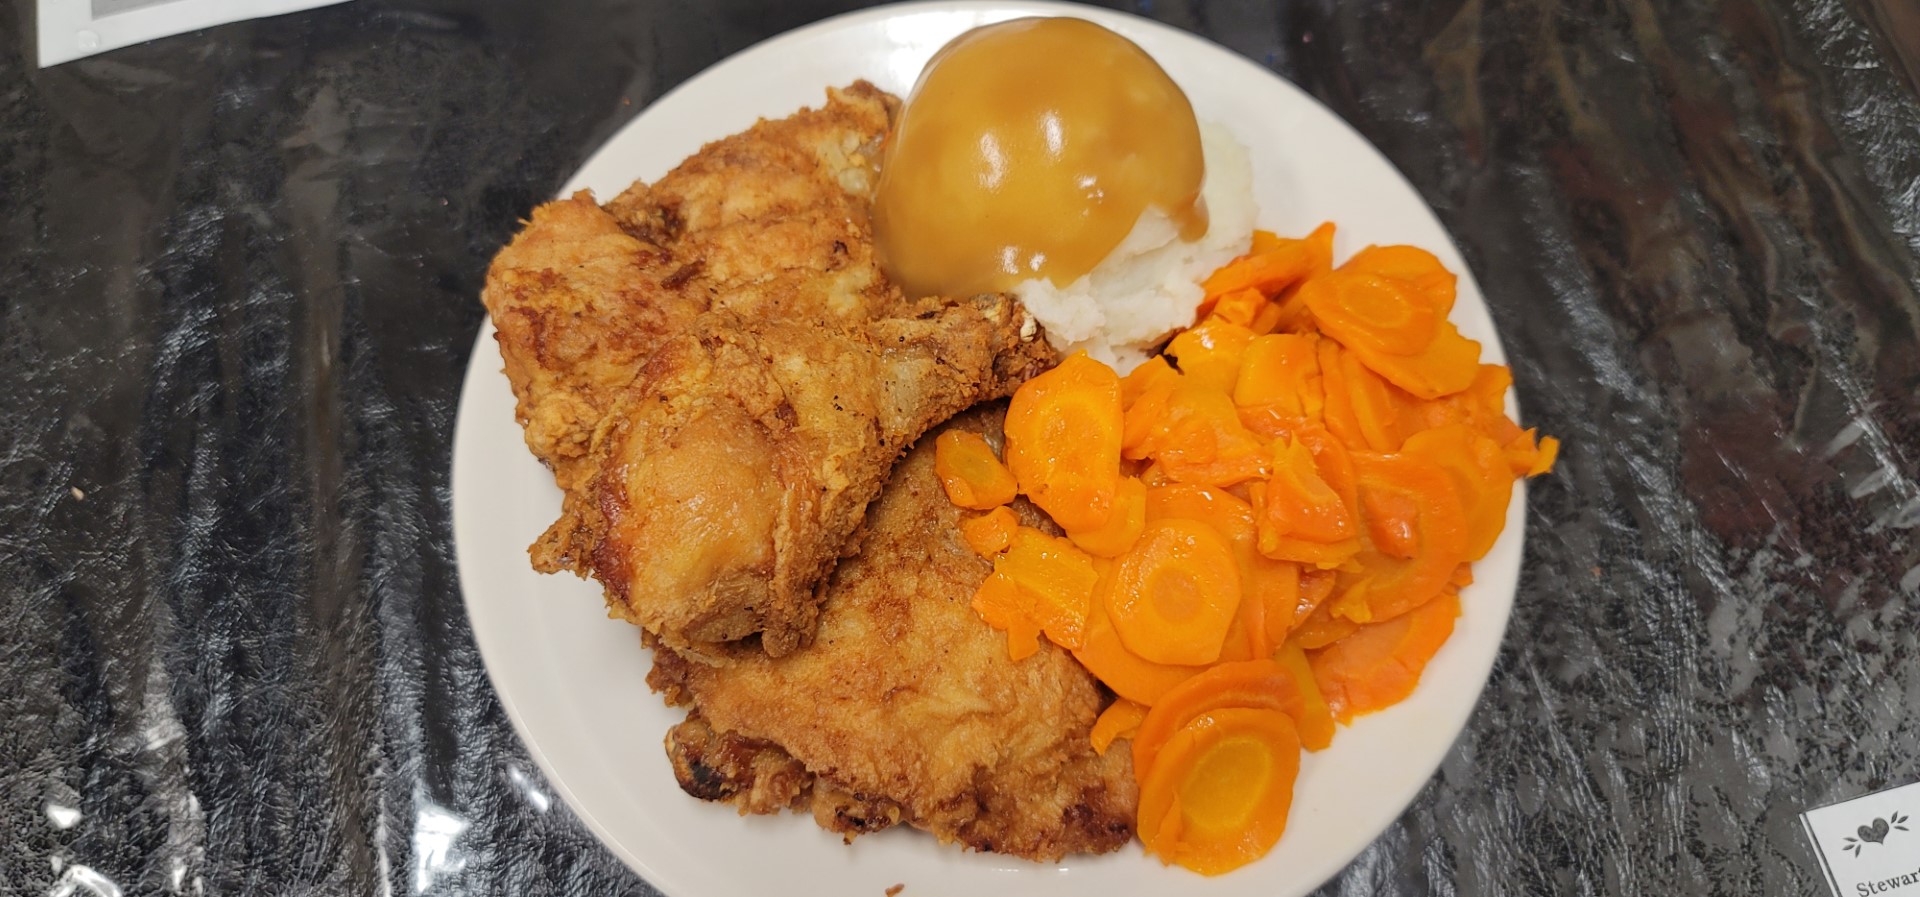 broasted chicken with mashed potatoes and gravy with carrots